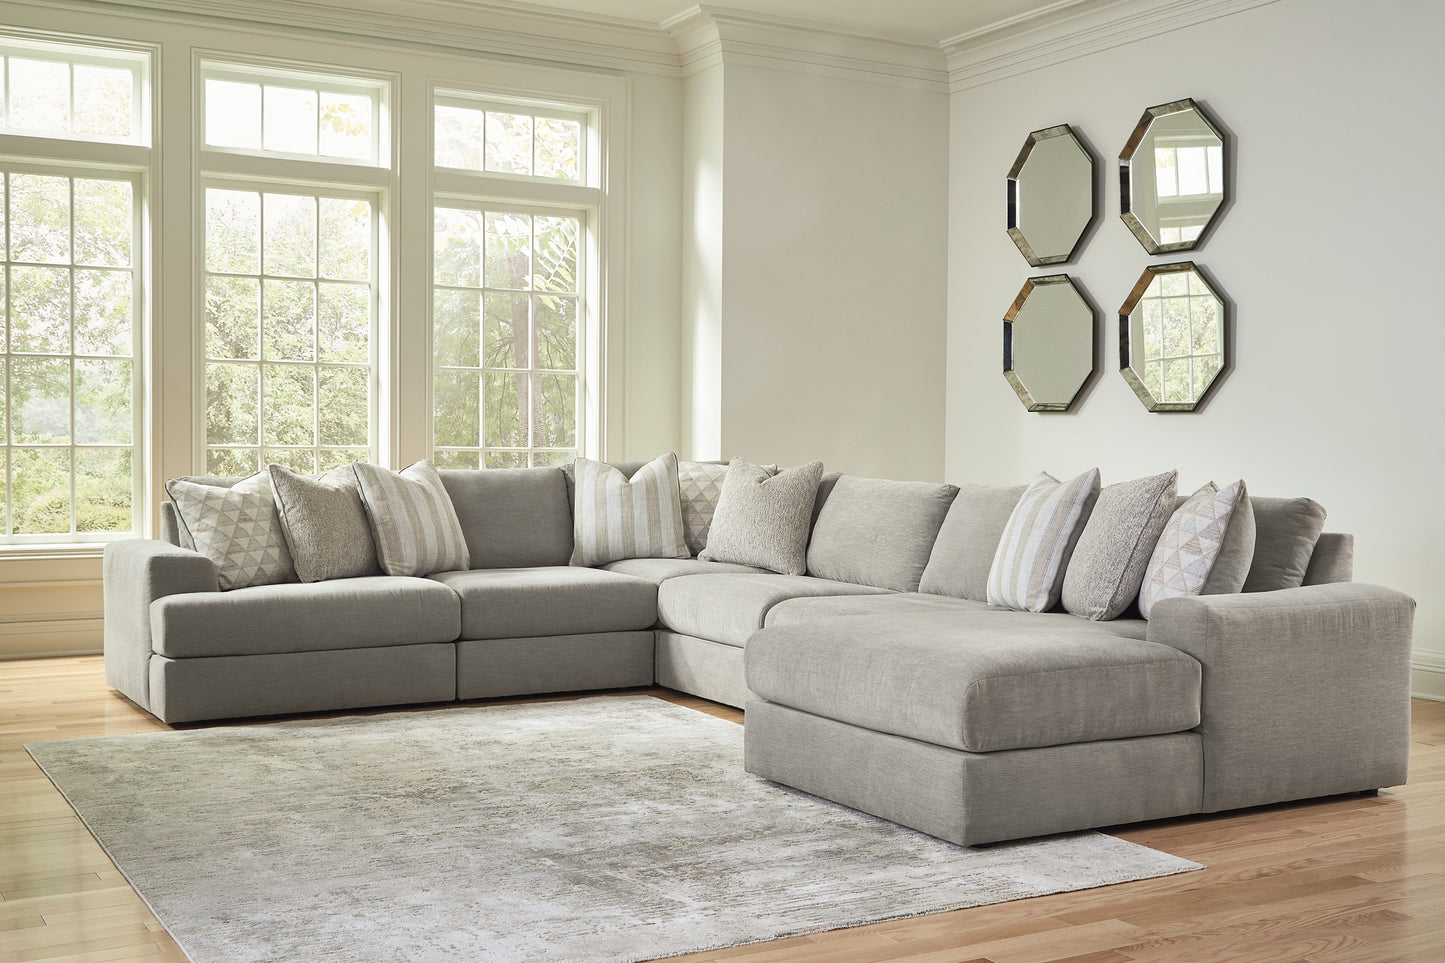 Avaliyah 6-Piece Sectional with Ottoman Signature Design by Ashley®